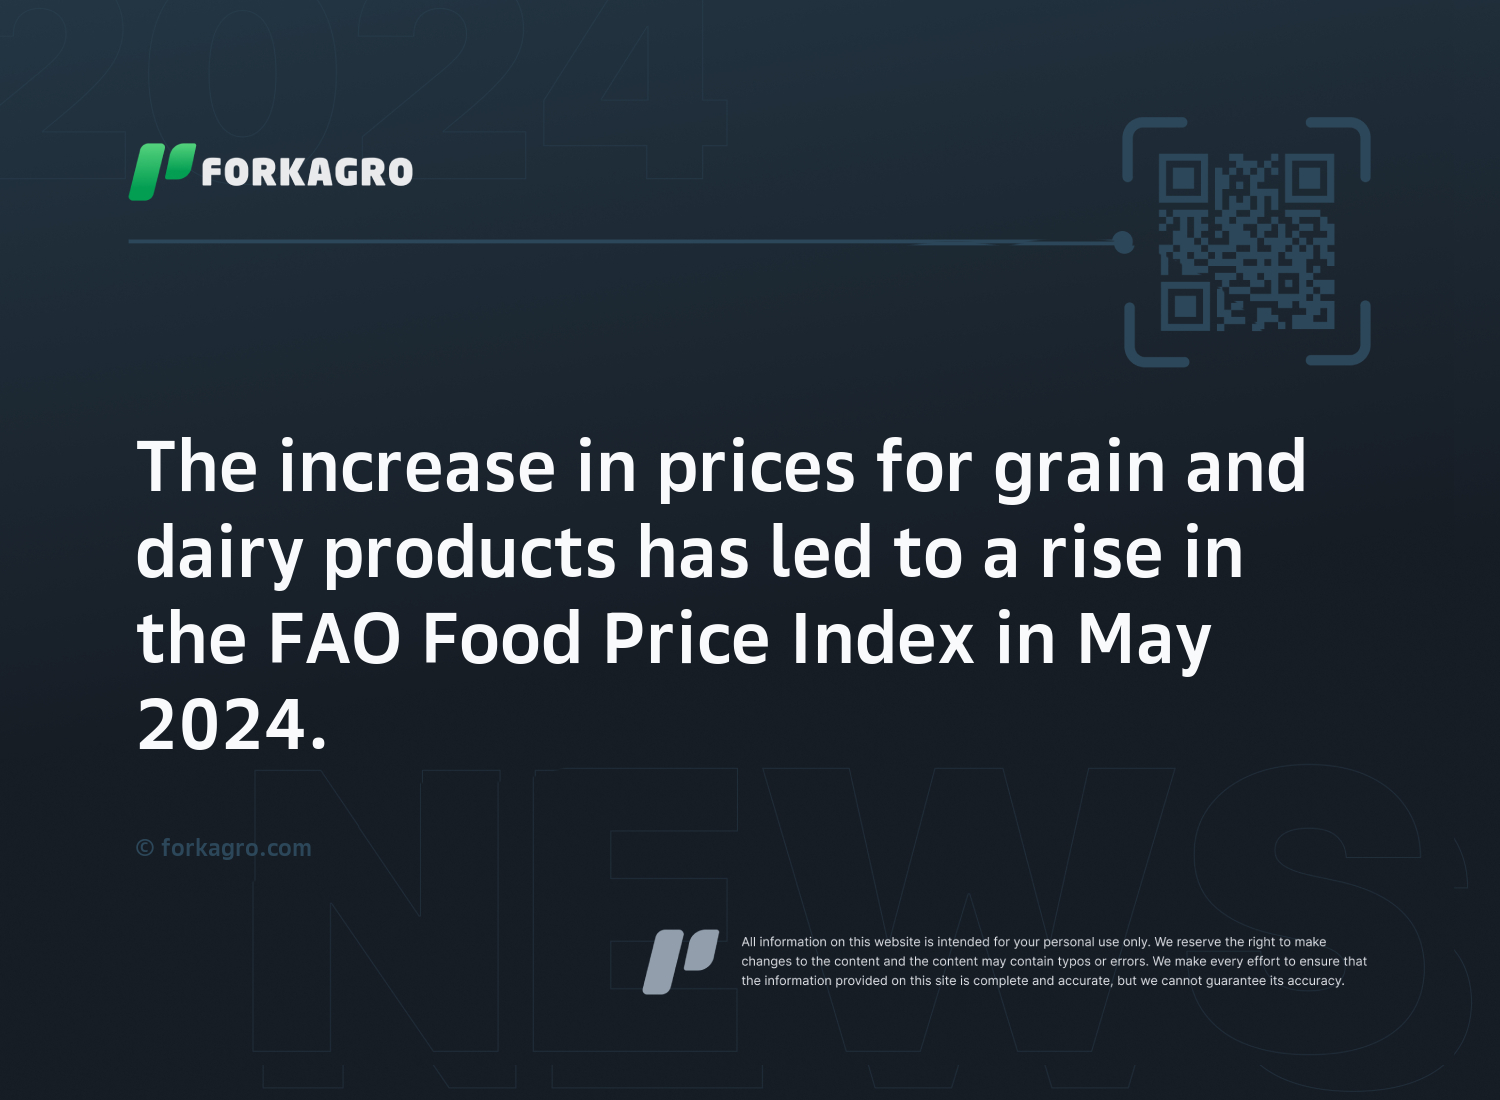 The increase in prices for grain and dairy products has led to a rise in the FAO Food Price Index in May 2024.